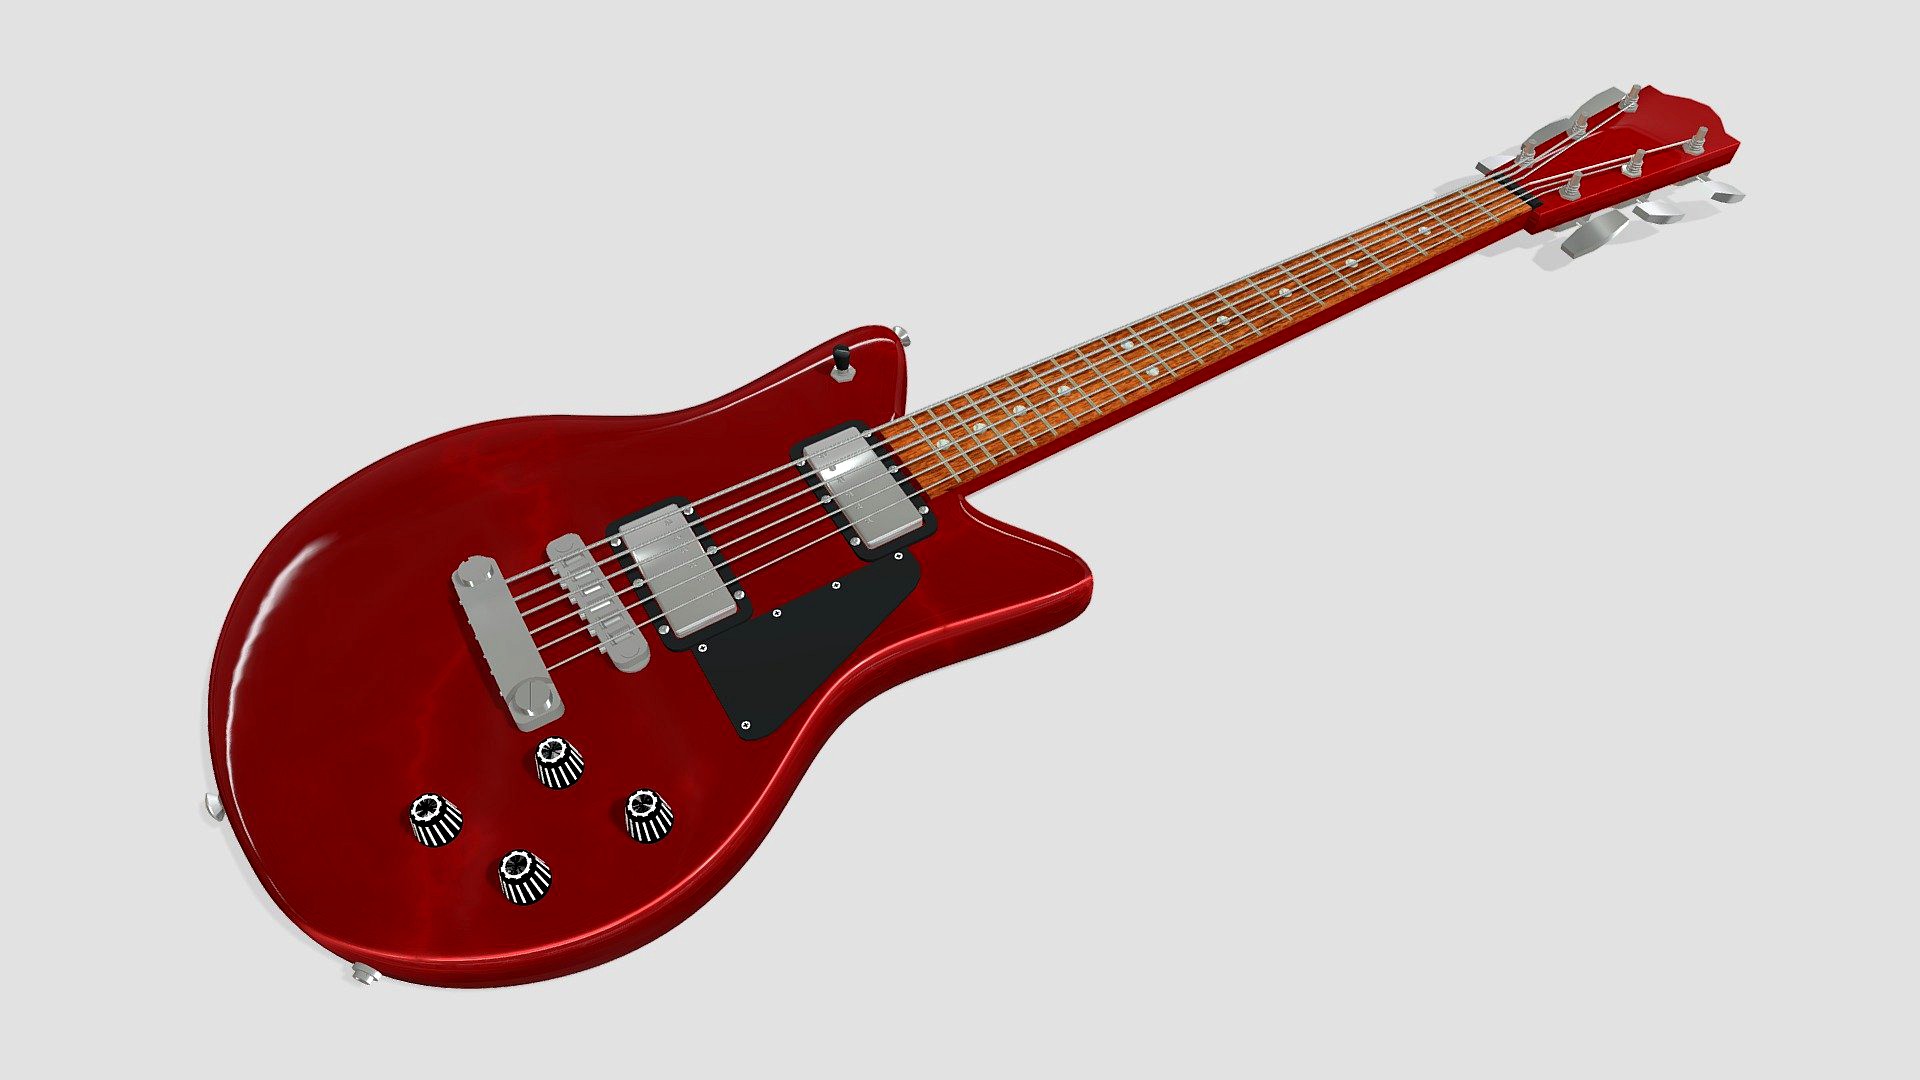 Guitar LG stylised in red